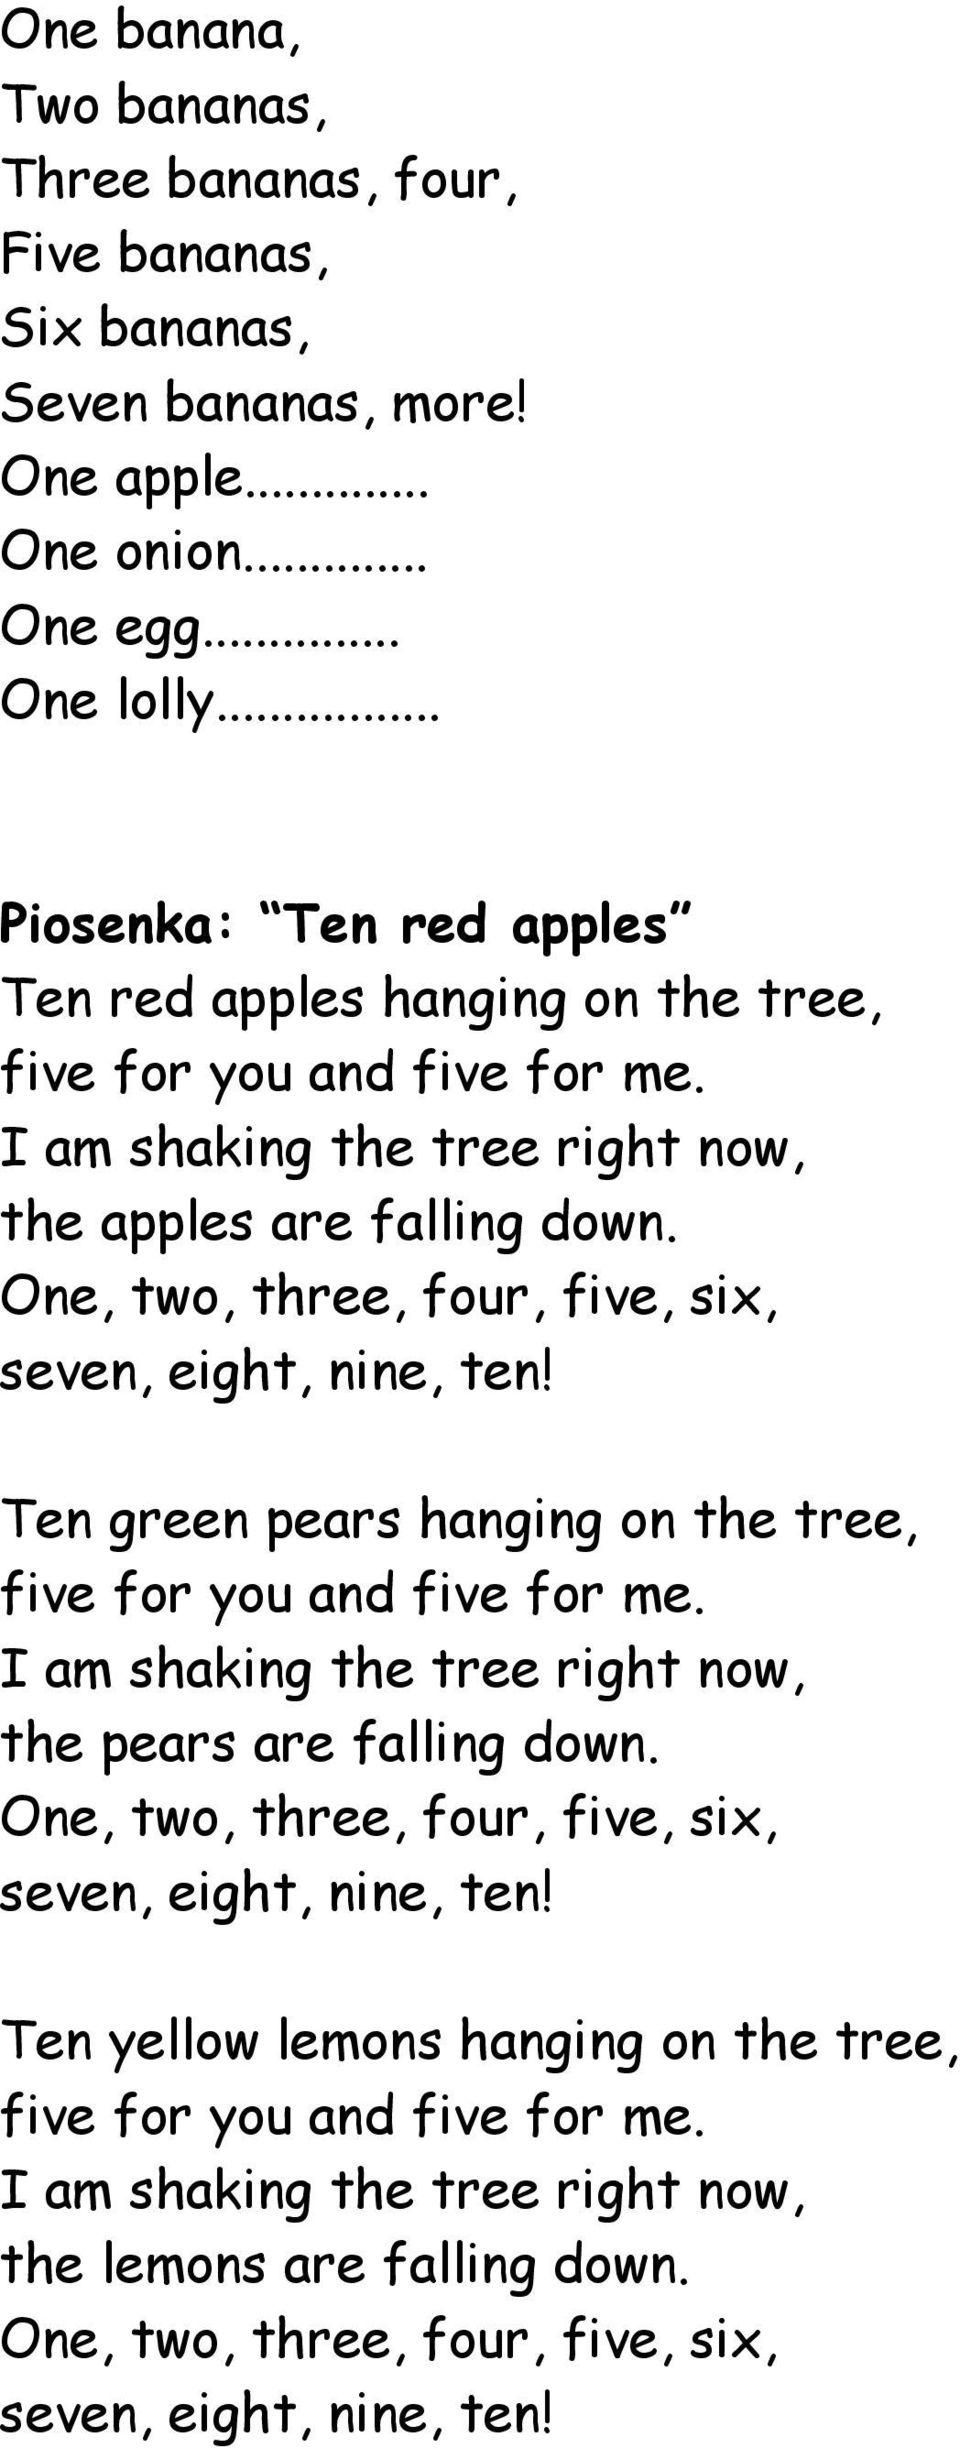 One, two, three, four, five, six, seven, eight, nine, ten! Ten green pears hanging on the tree, five for you and five for me.